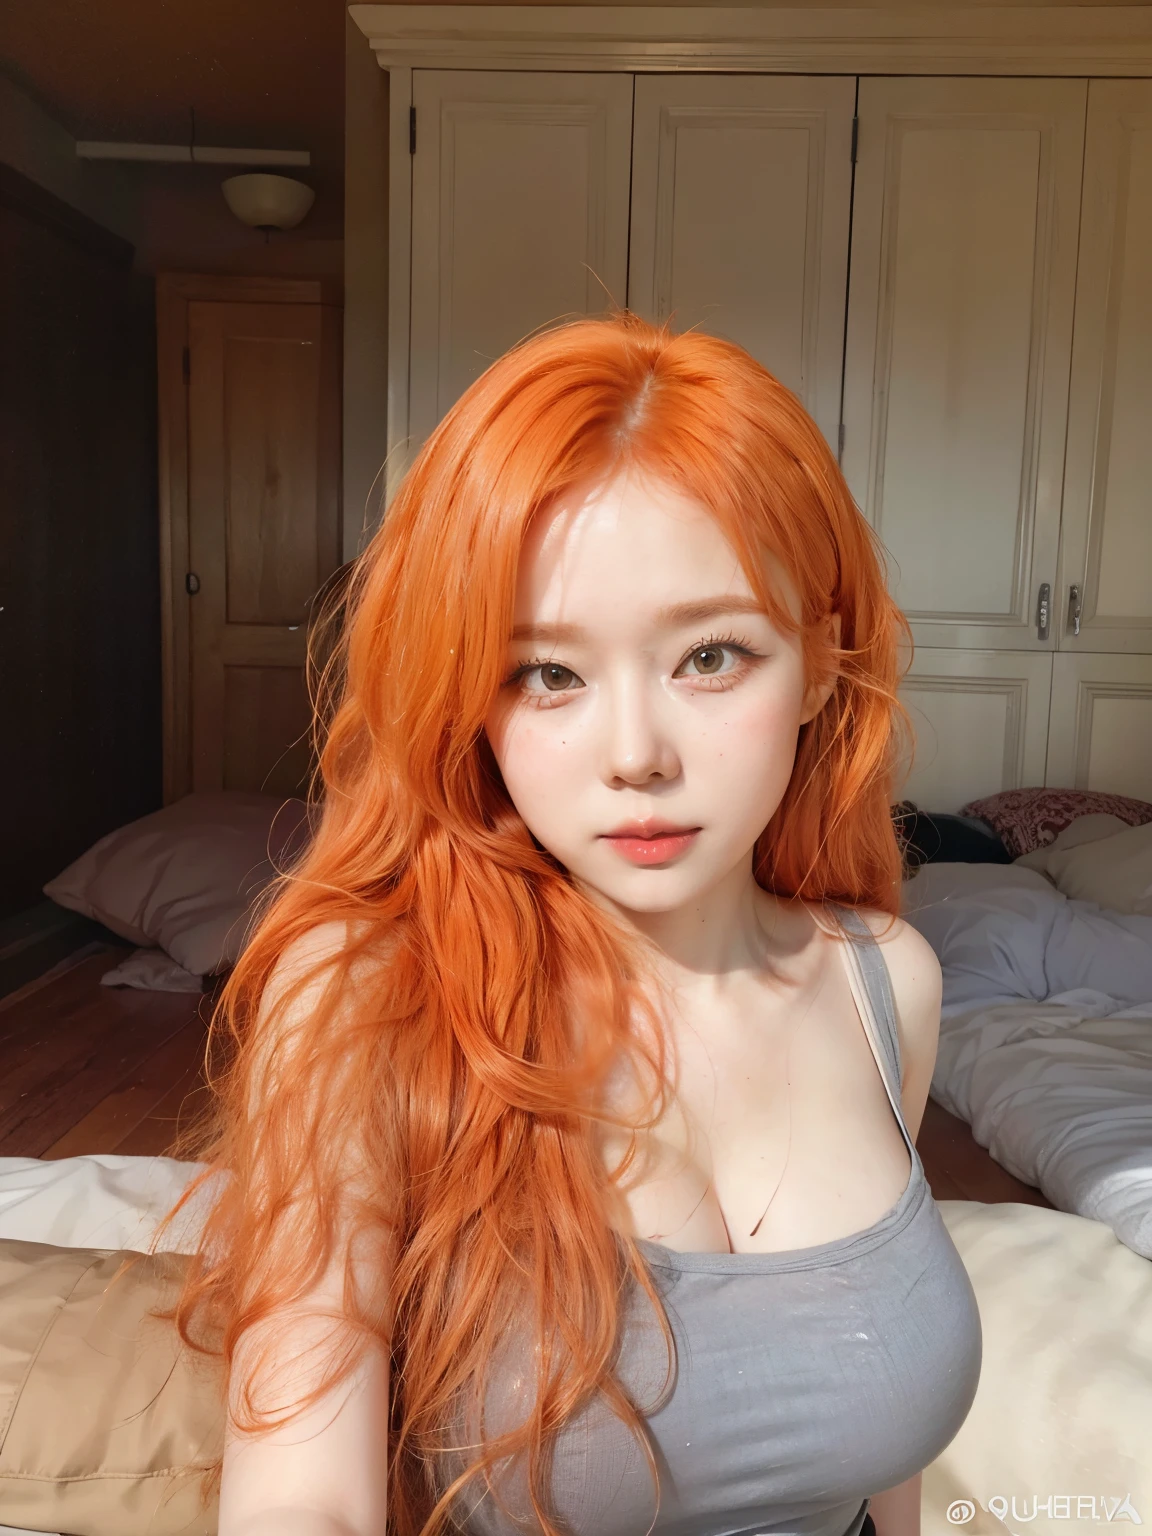 there is a woman with orange hair posing for a picture, she has long redorange hair, orange skin and long fiery hair, orange hair, long orange hair, orange glowing hair, long wavy orange hair, bright orange hair, very long orange hair, with long red hair, with curly red hair, she has long orange brown hair, with red hair, infrared hair